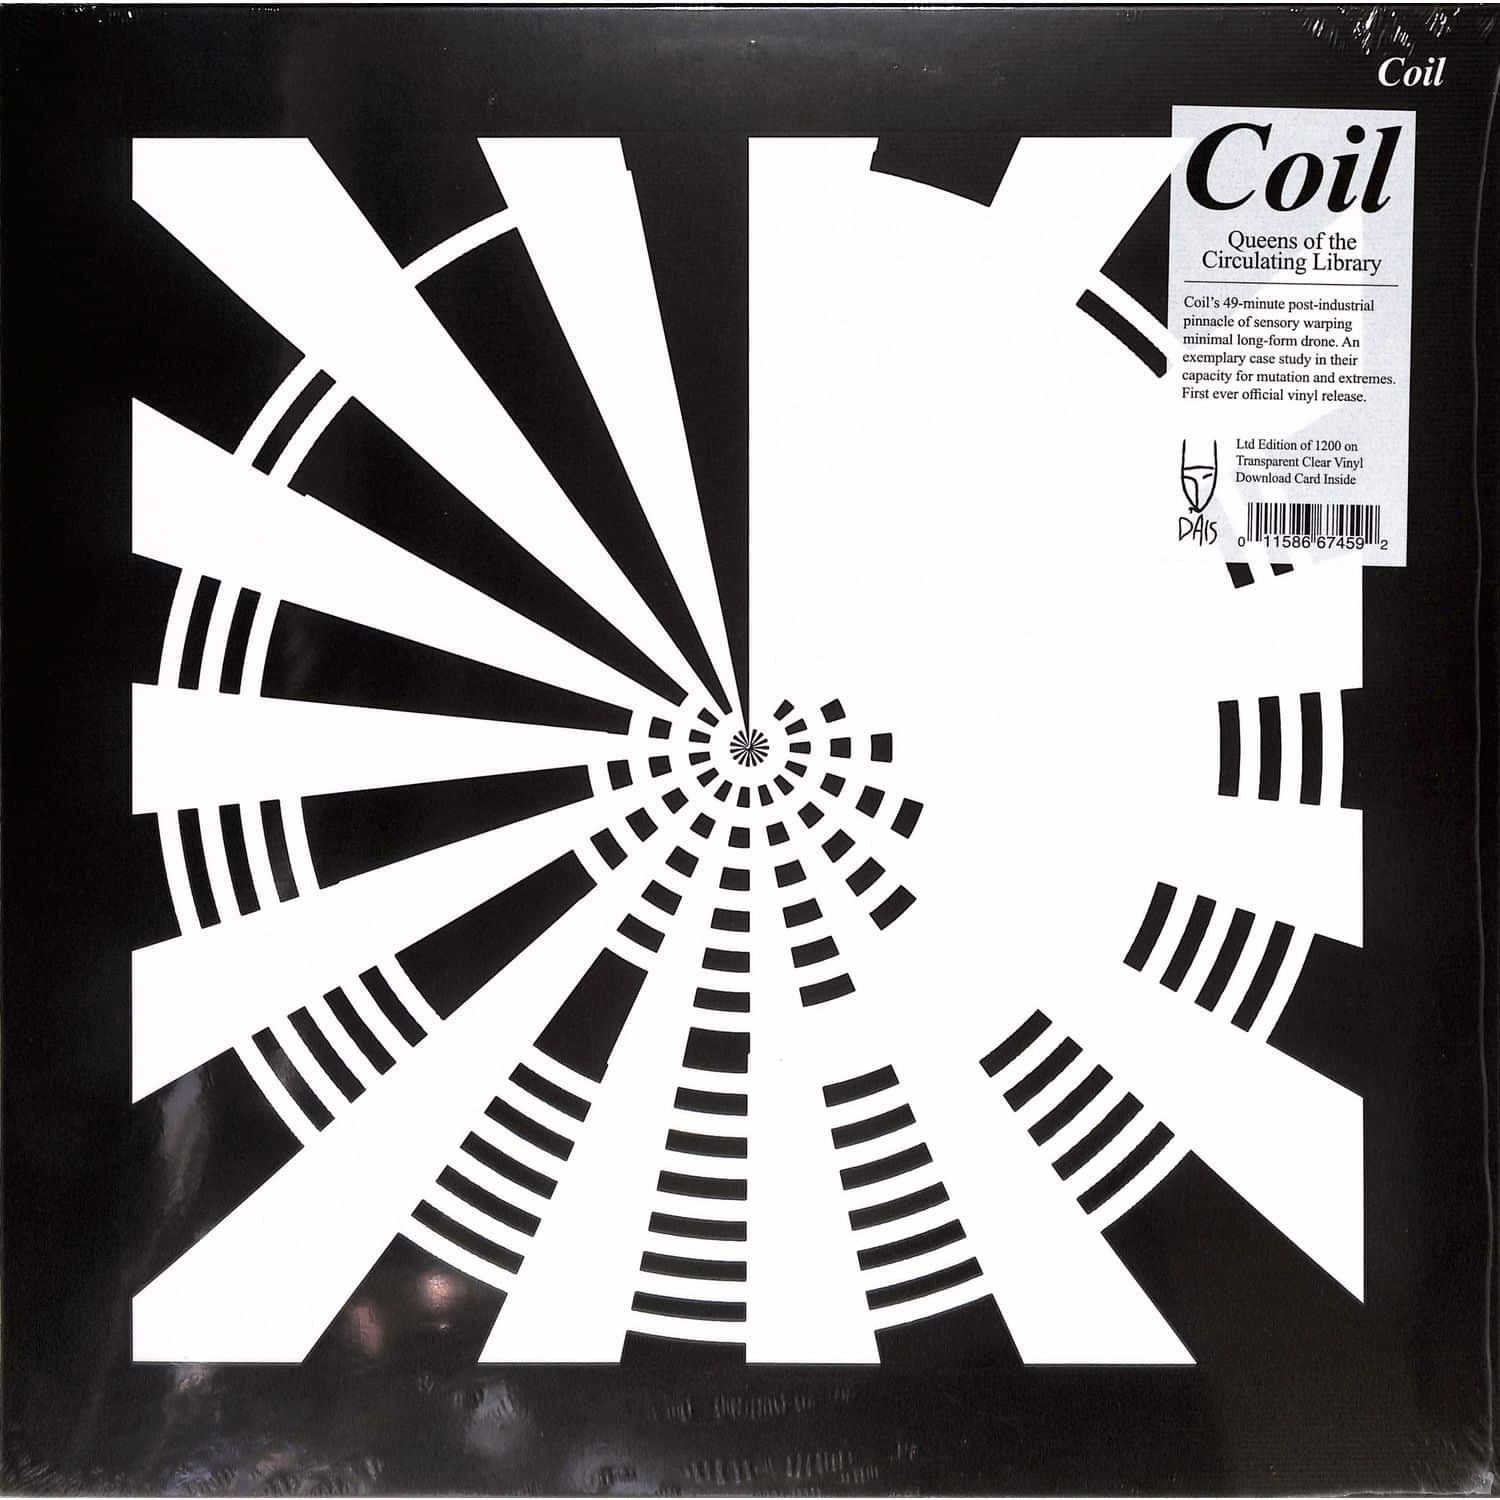 Coil - QUEENS OF THE CIRCULATING LIBRARY 